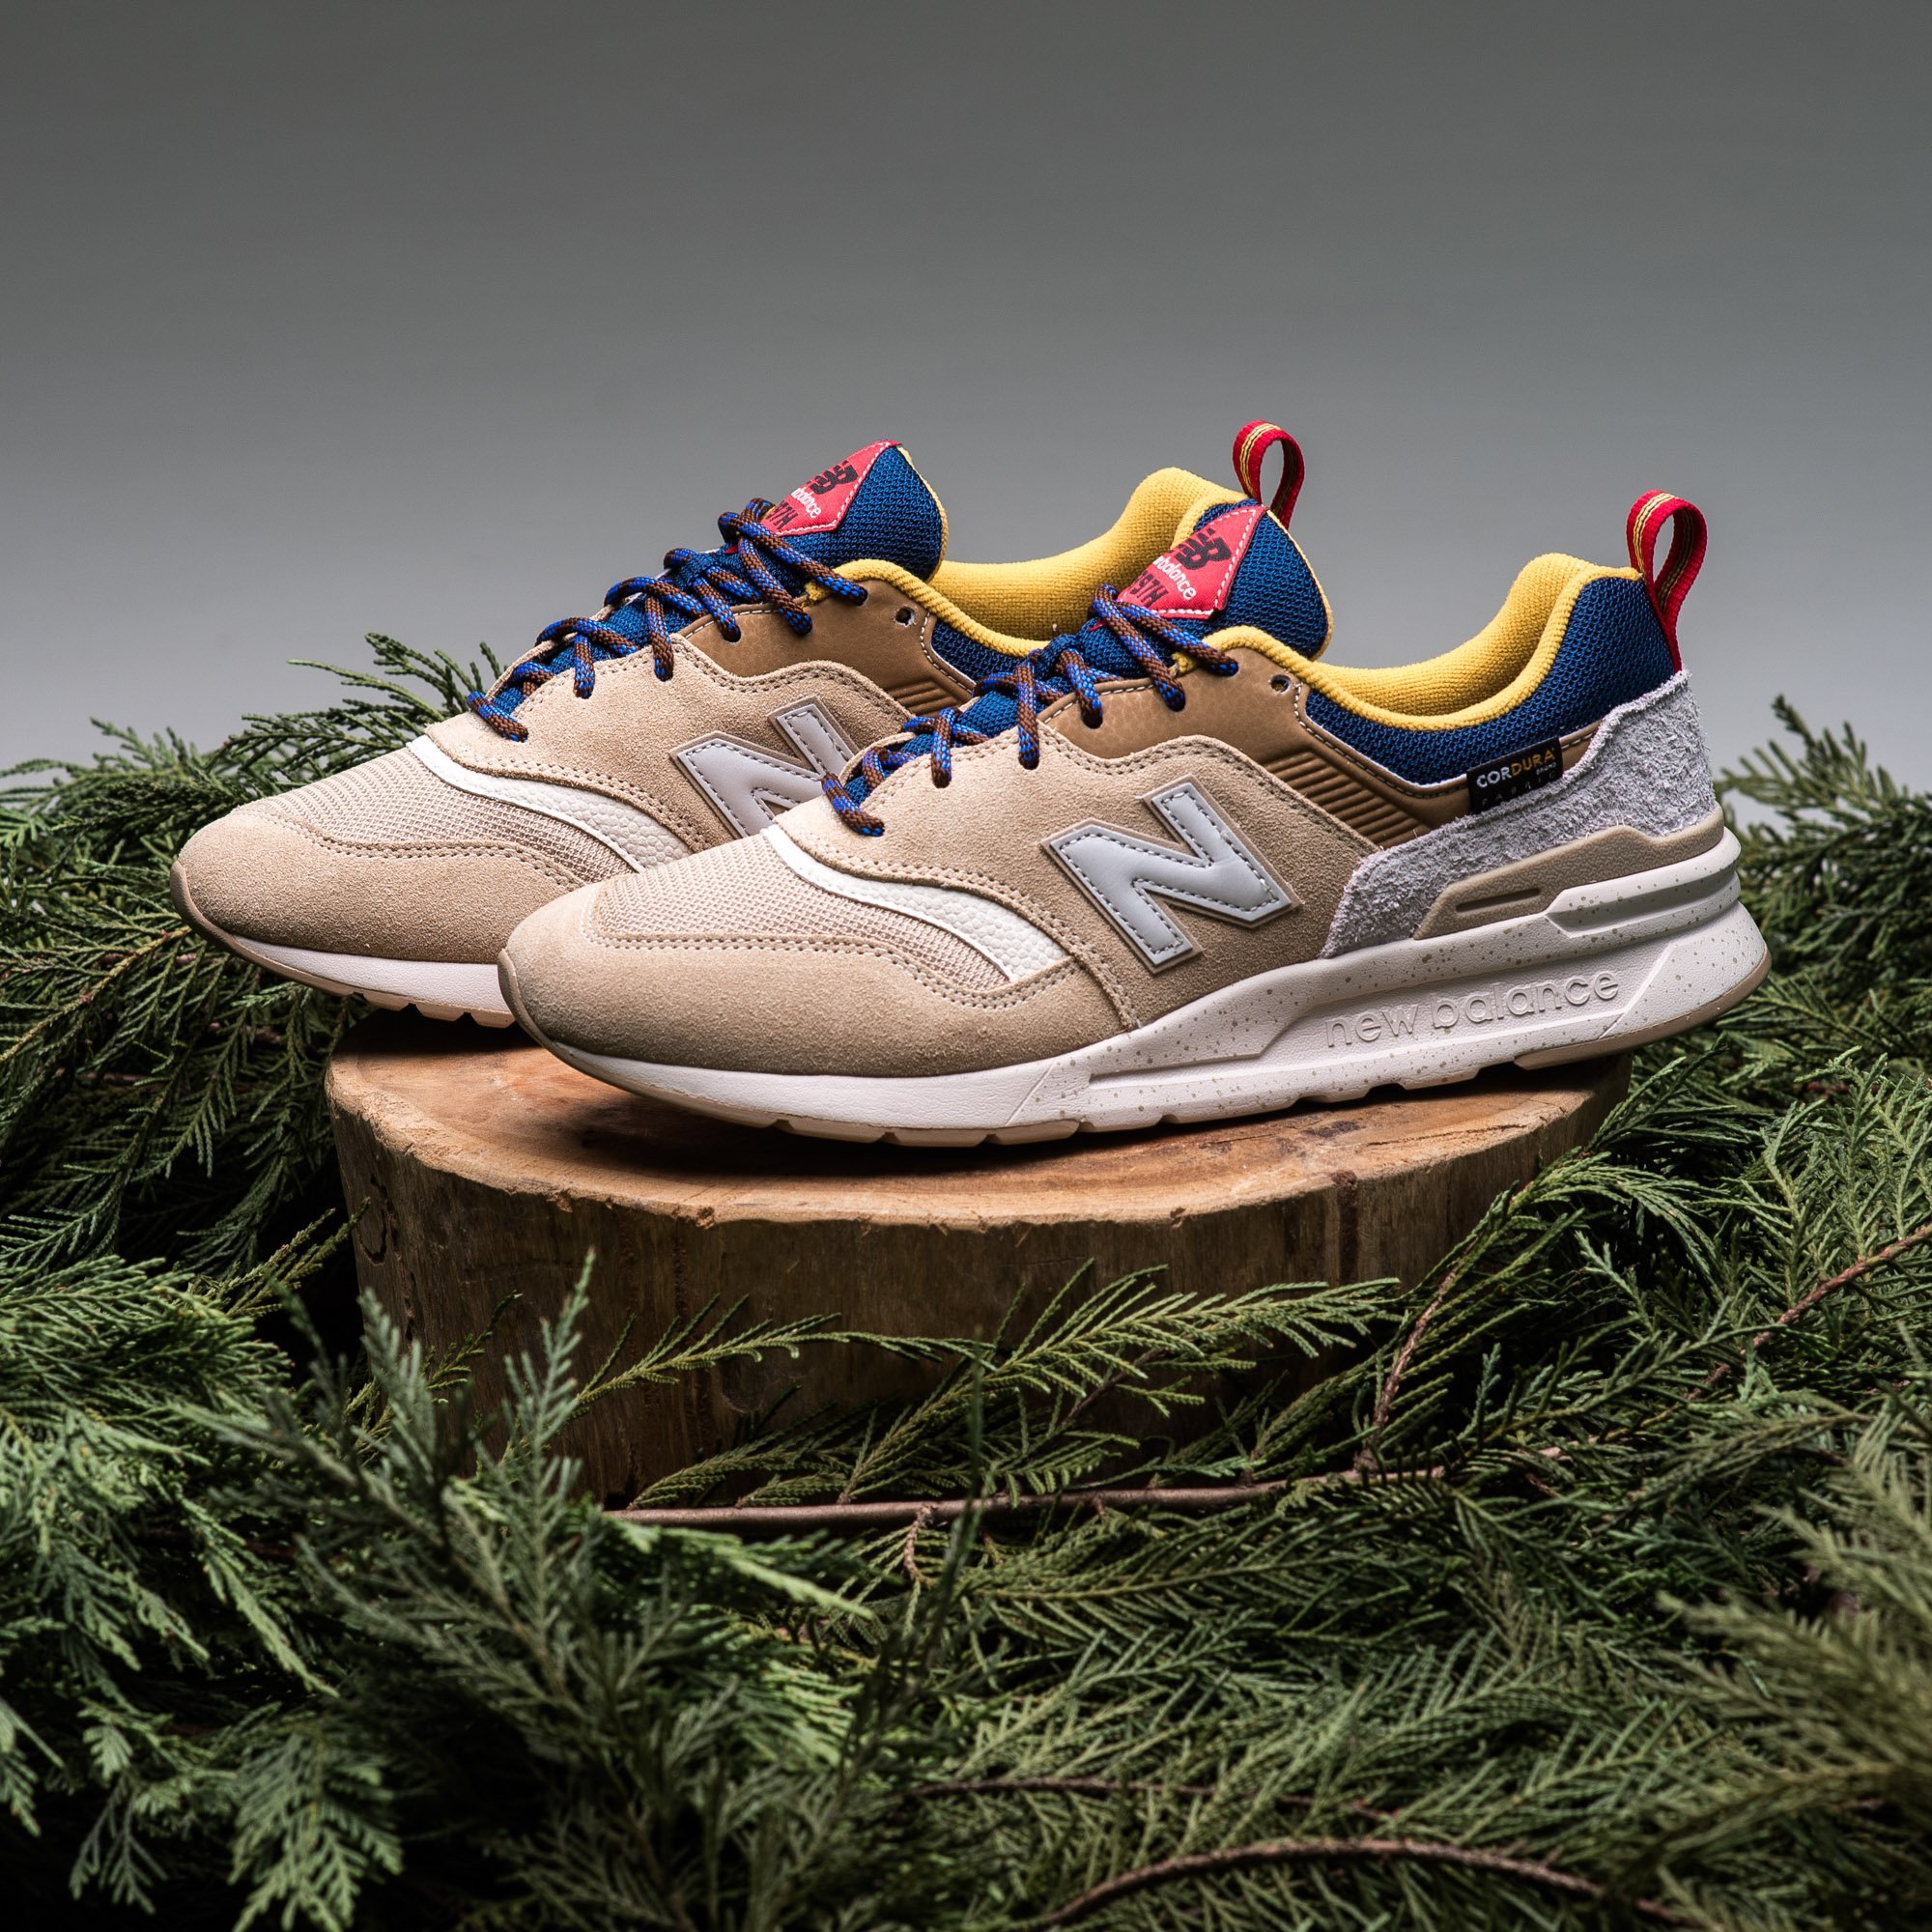 Sneaker on Twitter: "Now Available :: @newbalance CM997HFA 'Outdoor Pack' - Incense/Moroccan Tile :: https://t.co/1AWzxcsjBJ https://t.co/s3ON5xBGNU" / Twitter